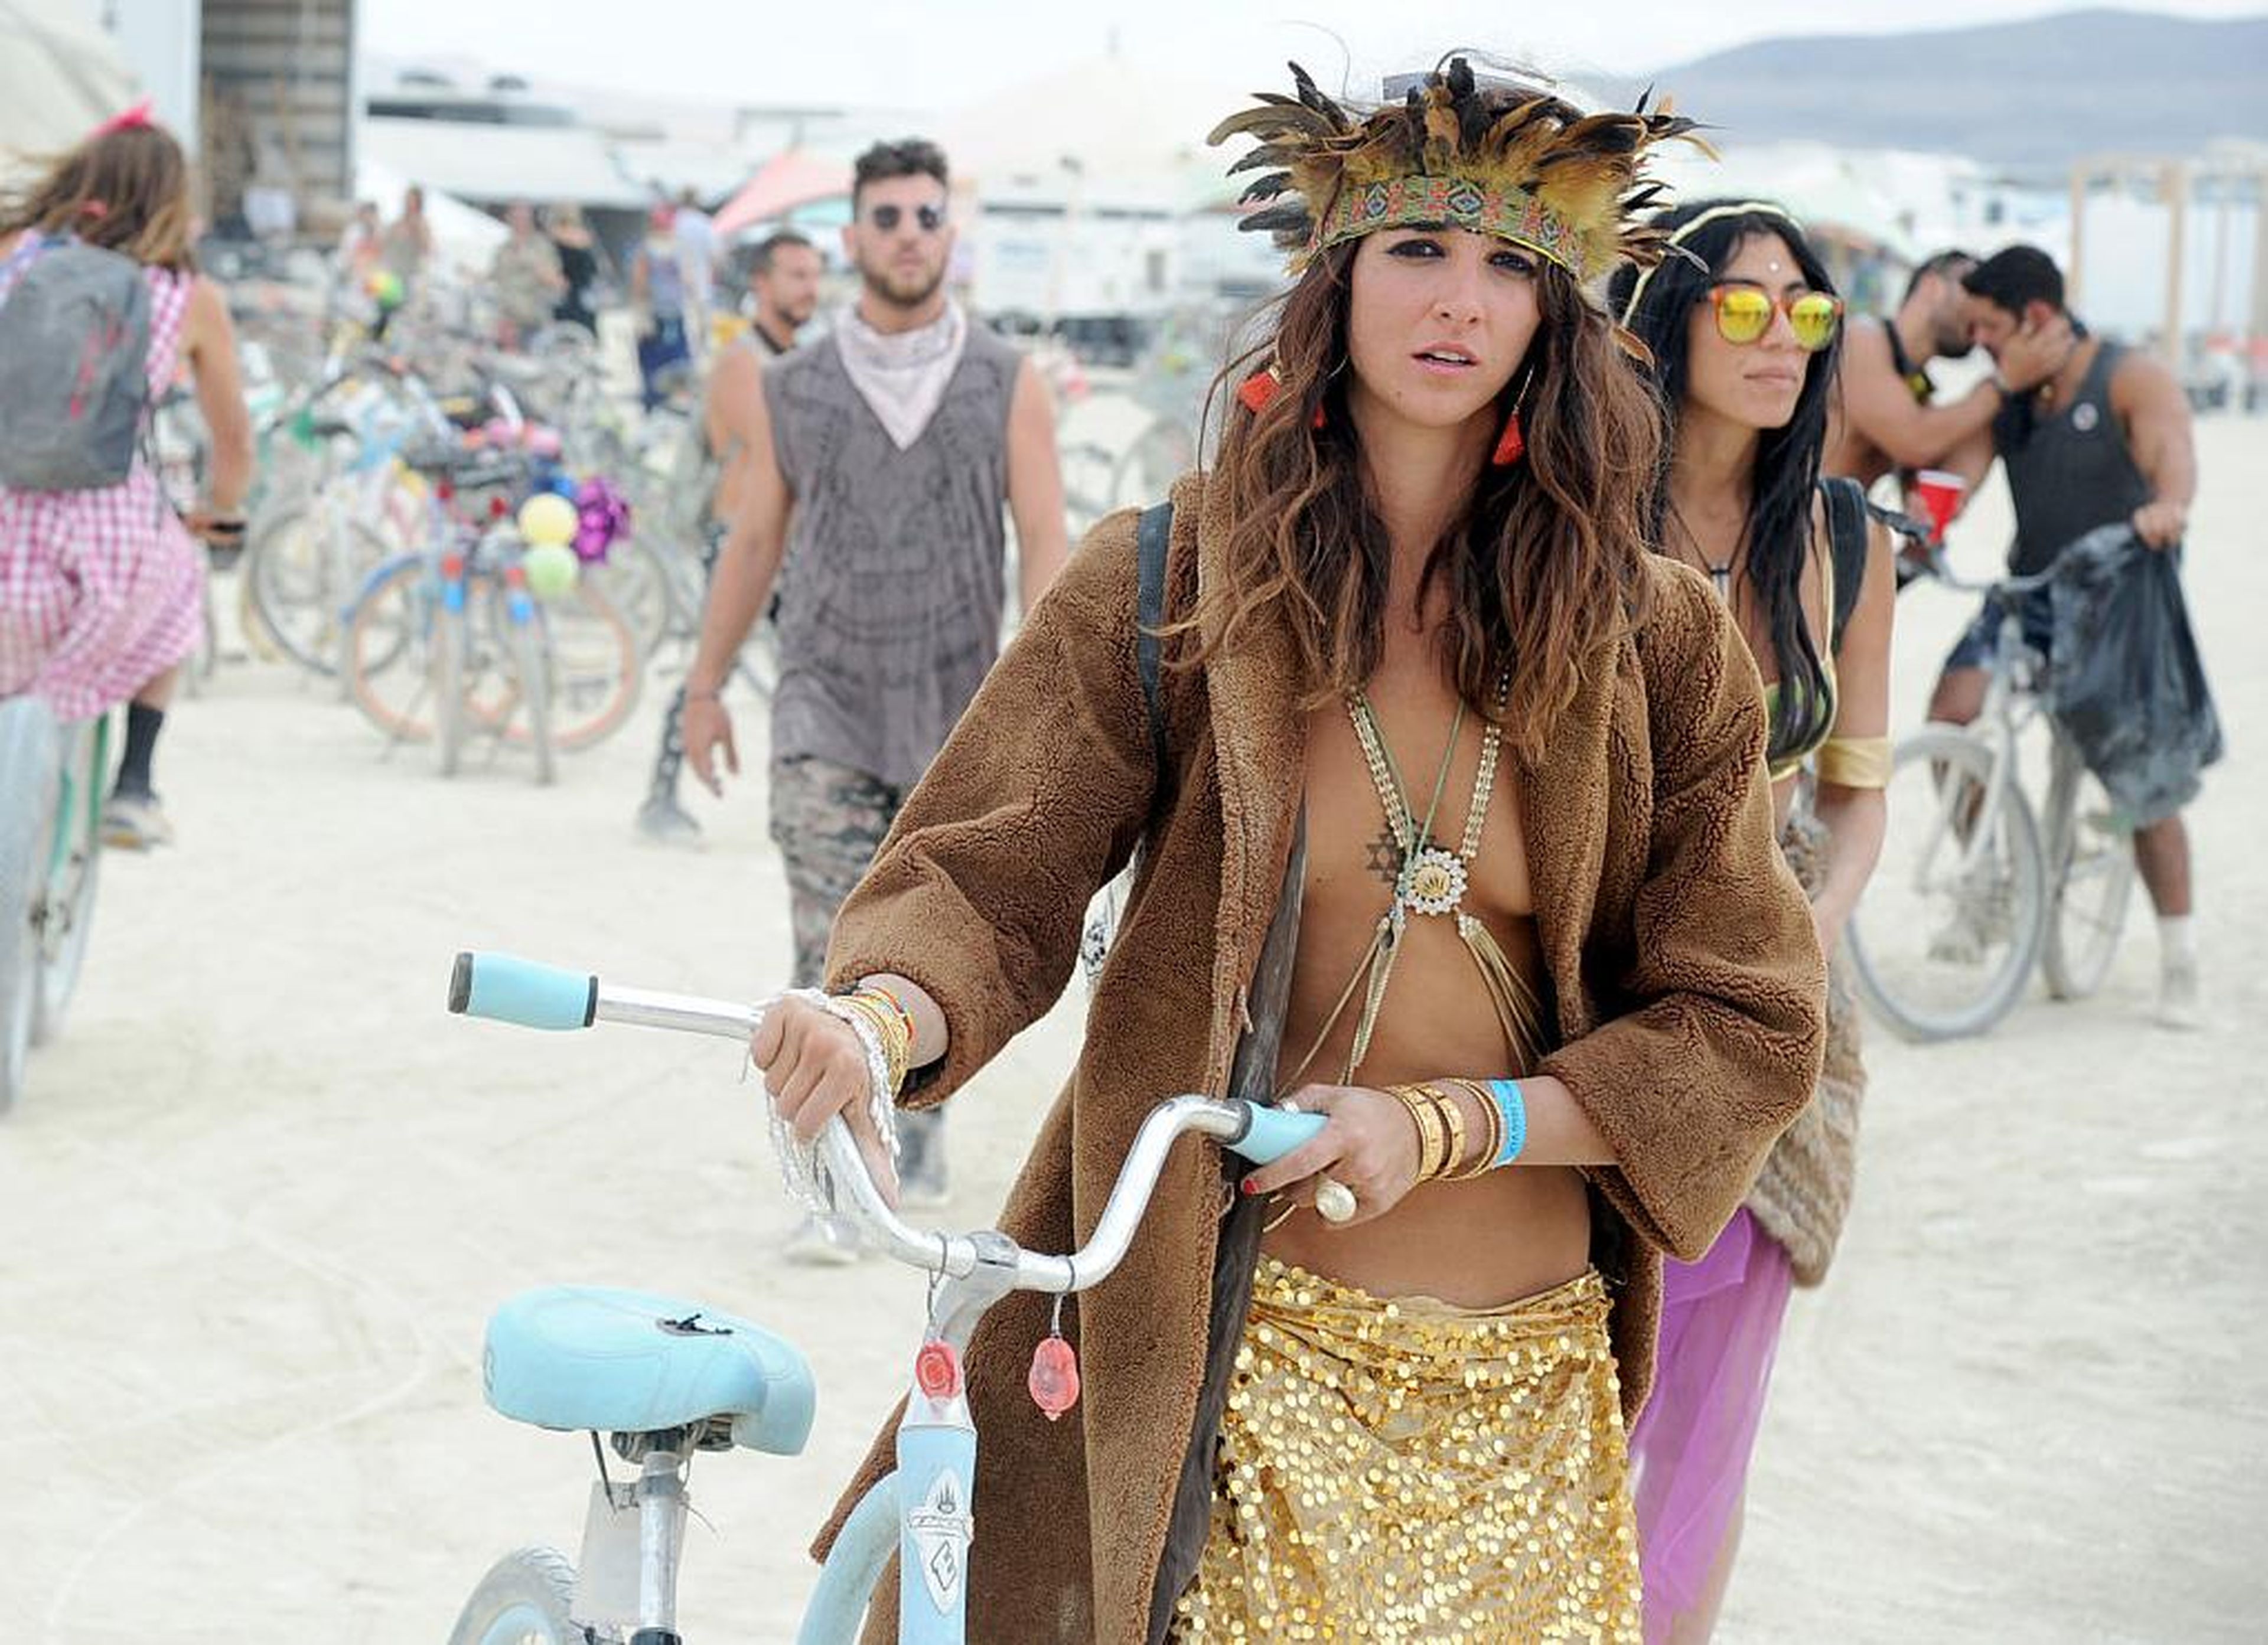 Some were quick to joke and speculate that Dorsey and members of his team may be at the Burning Man music festival.